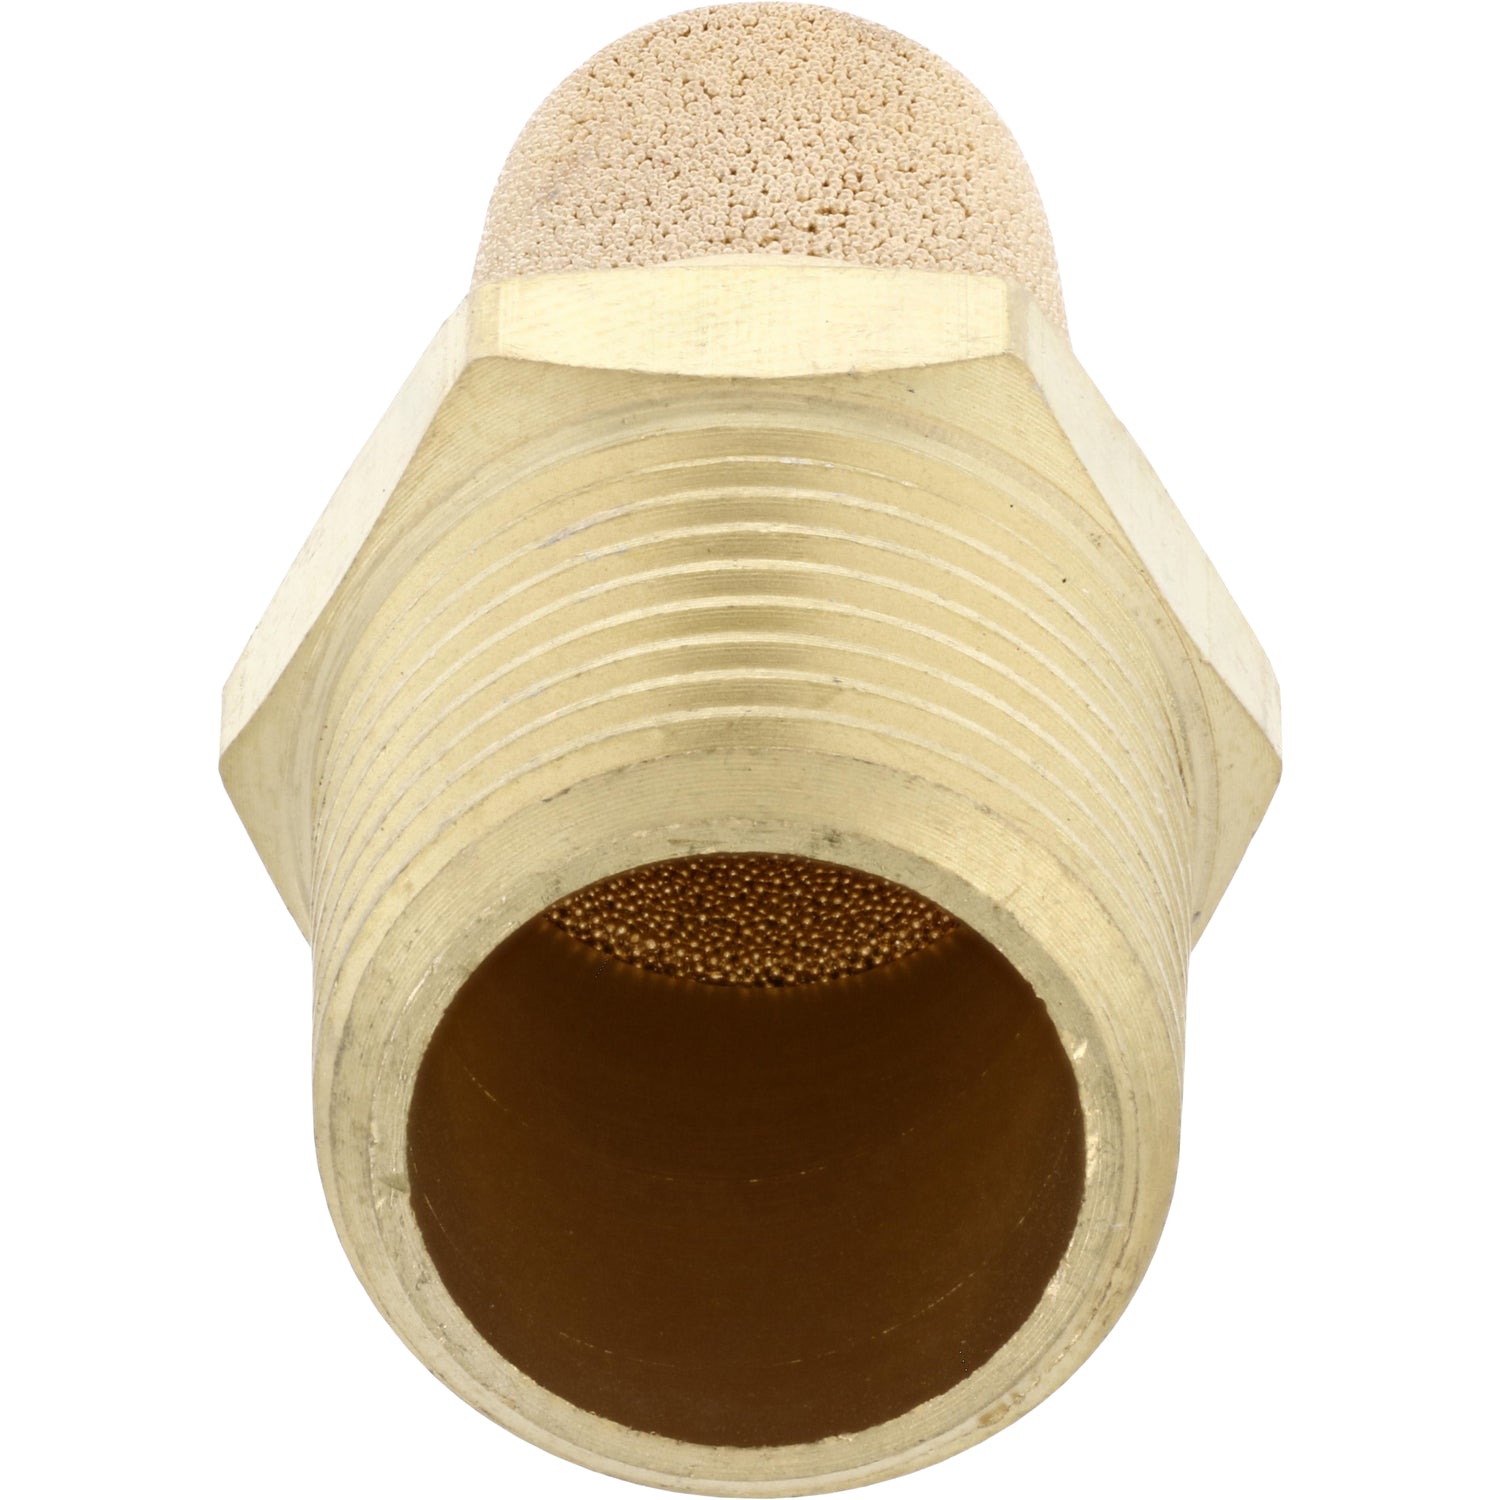 Brass cone shapped porous metal filter-muffler with 3/8 NPT threads on white background. 